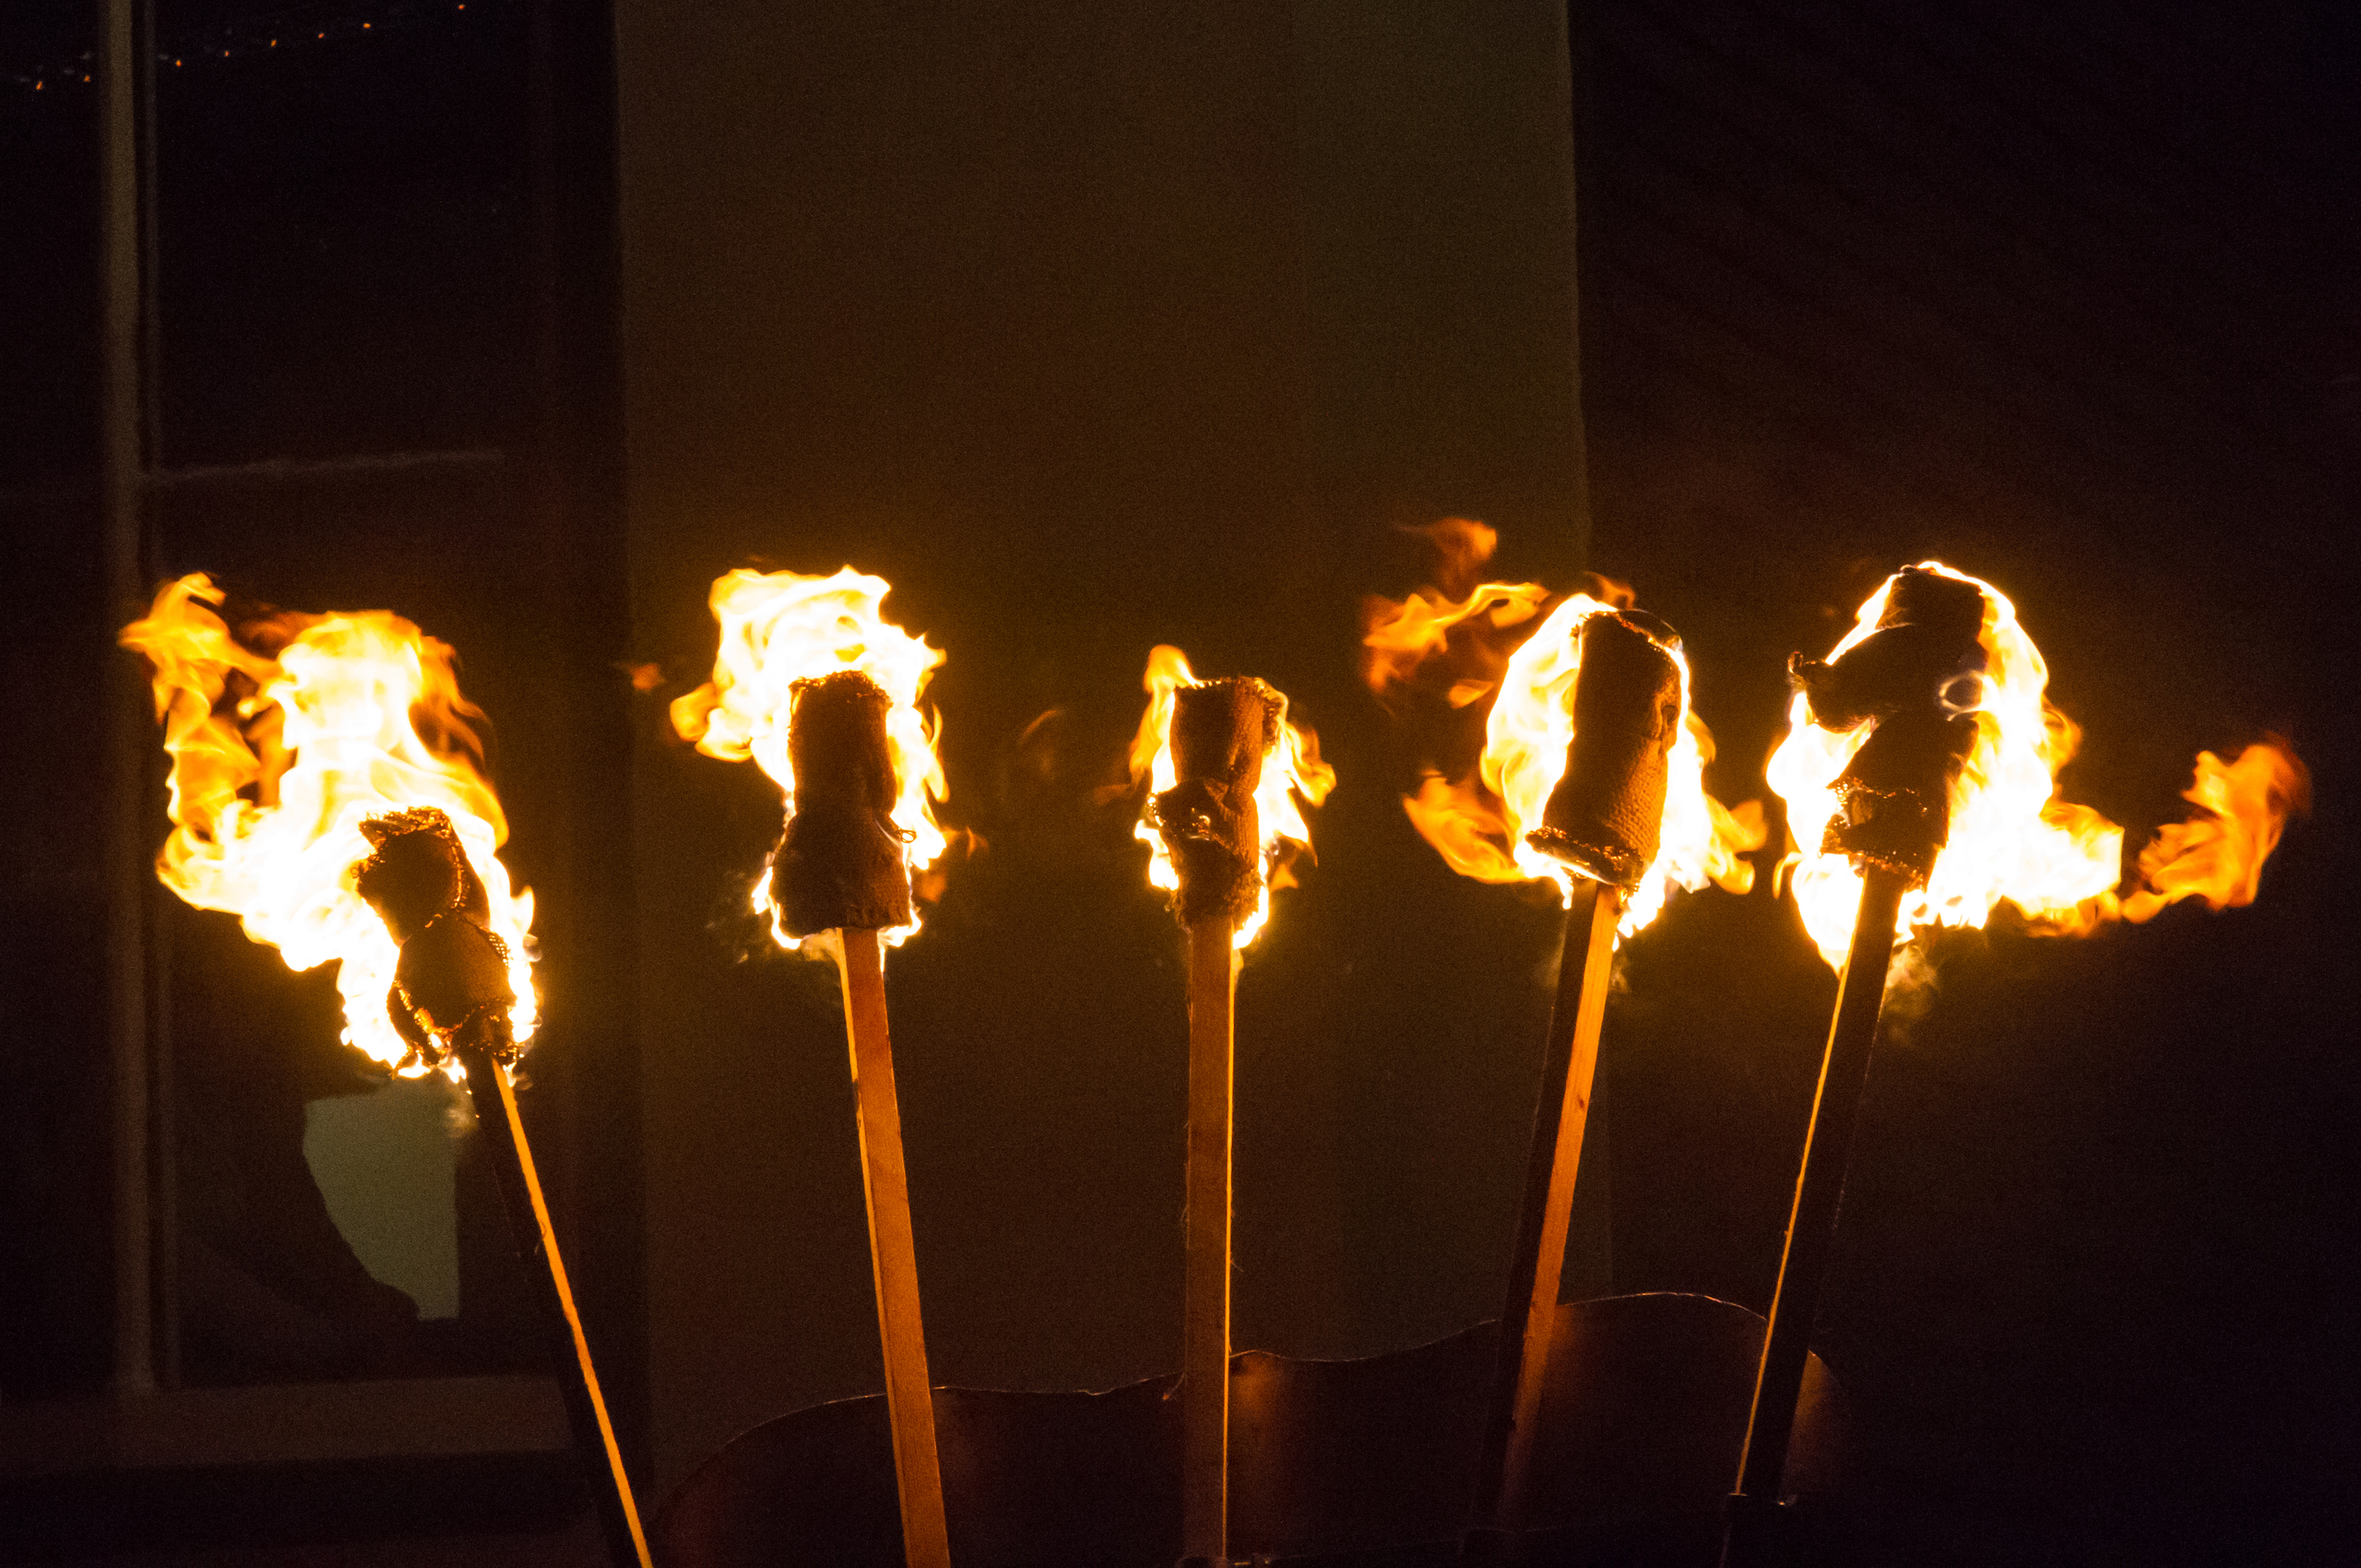 A line of burning torches